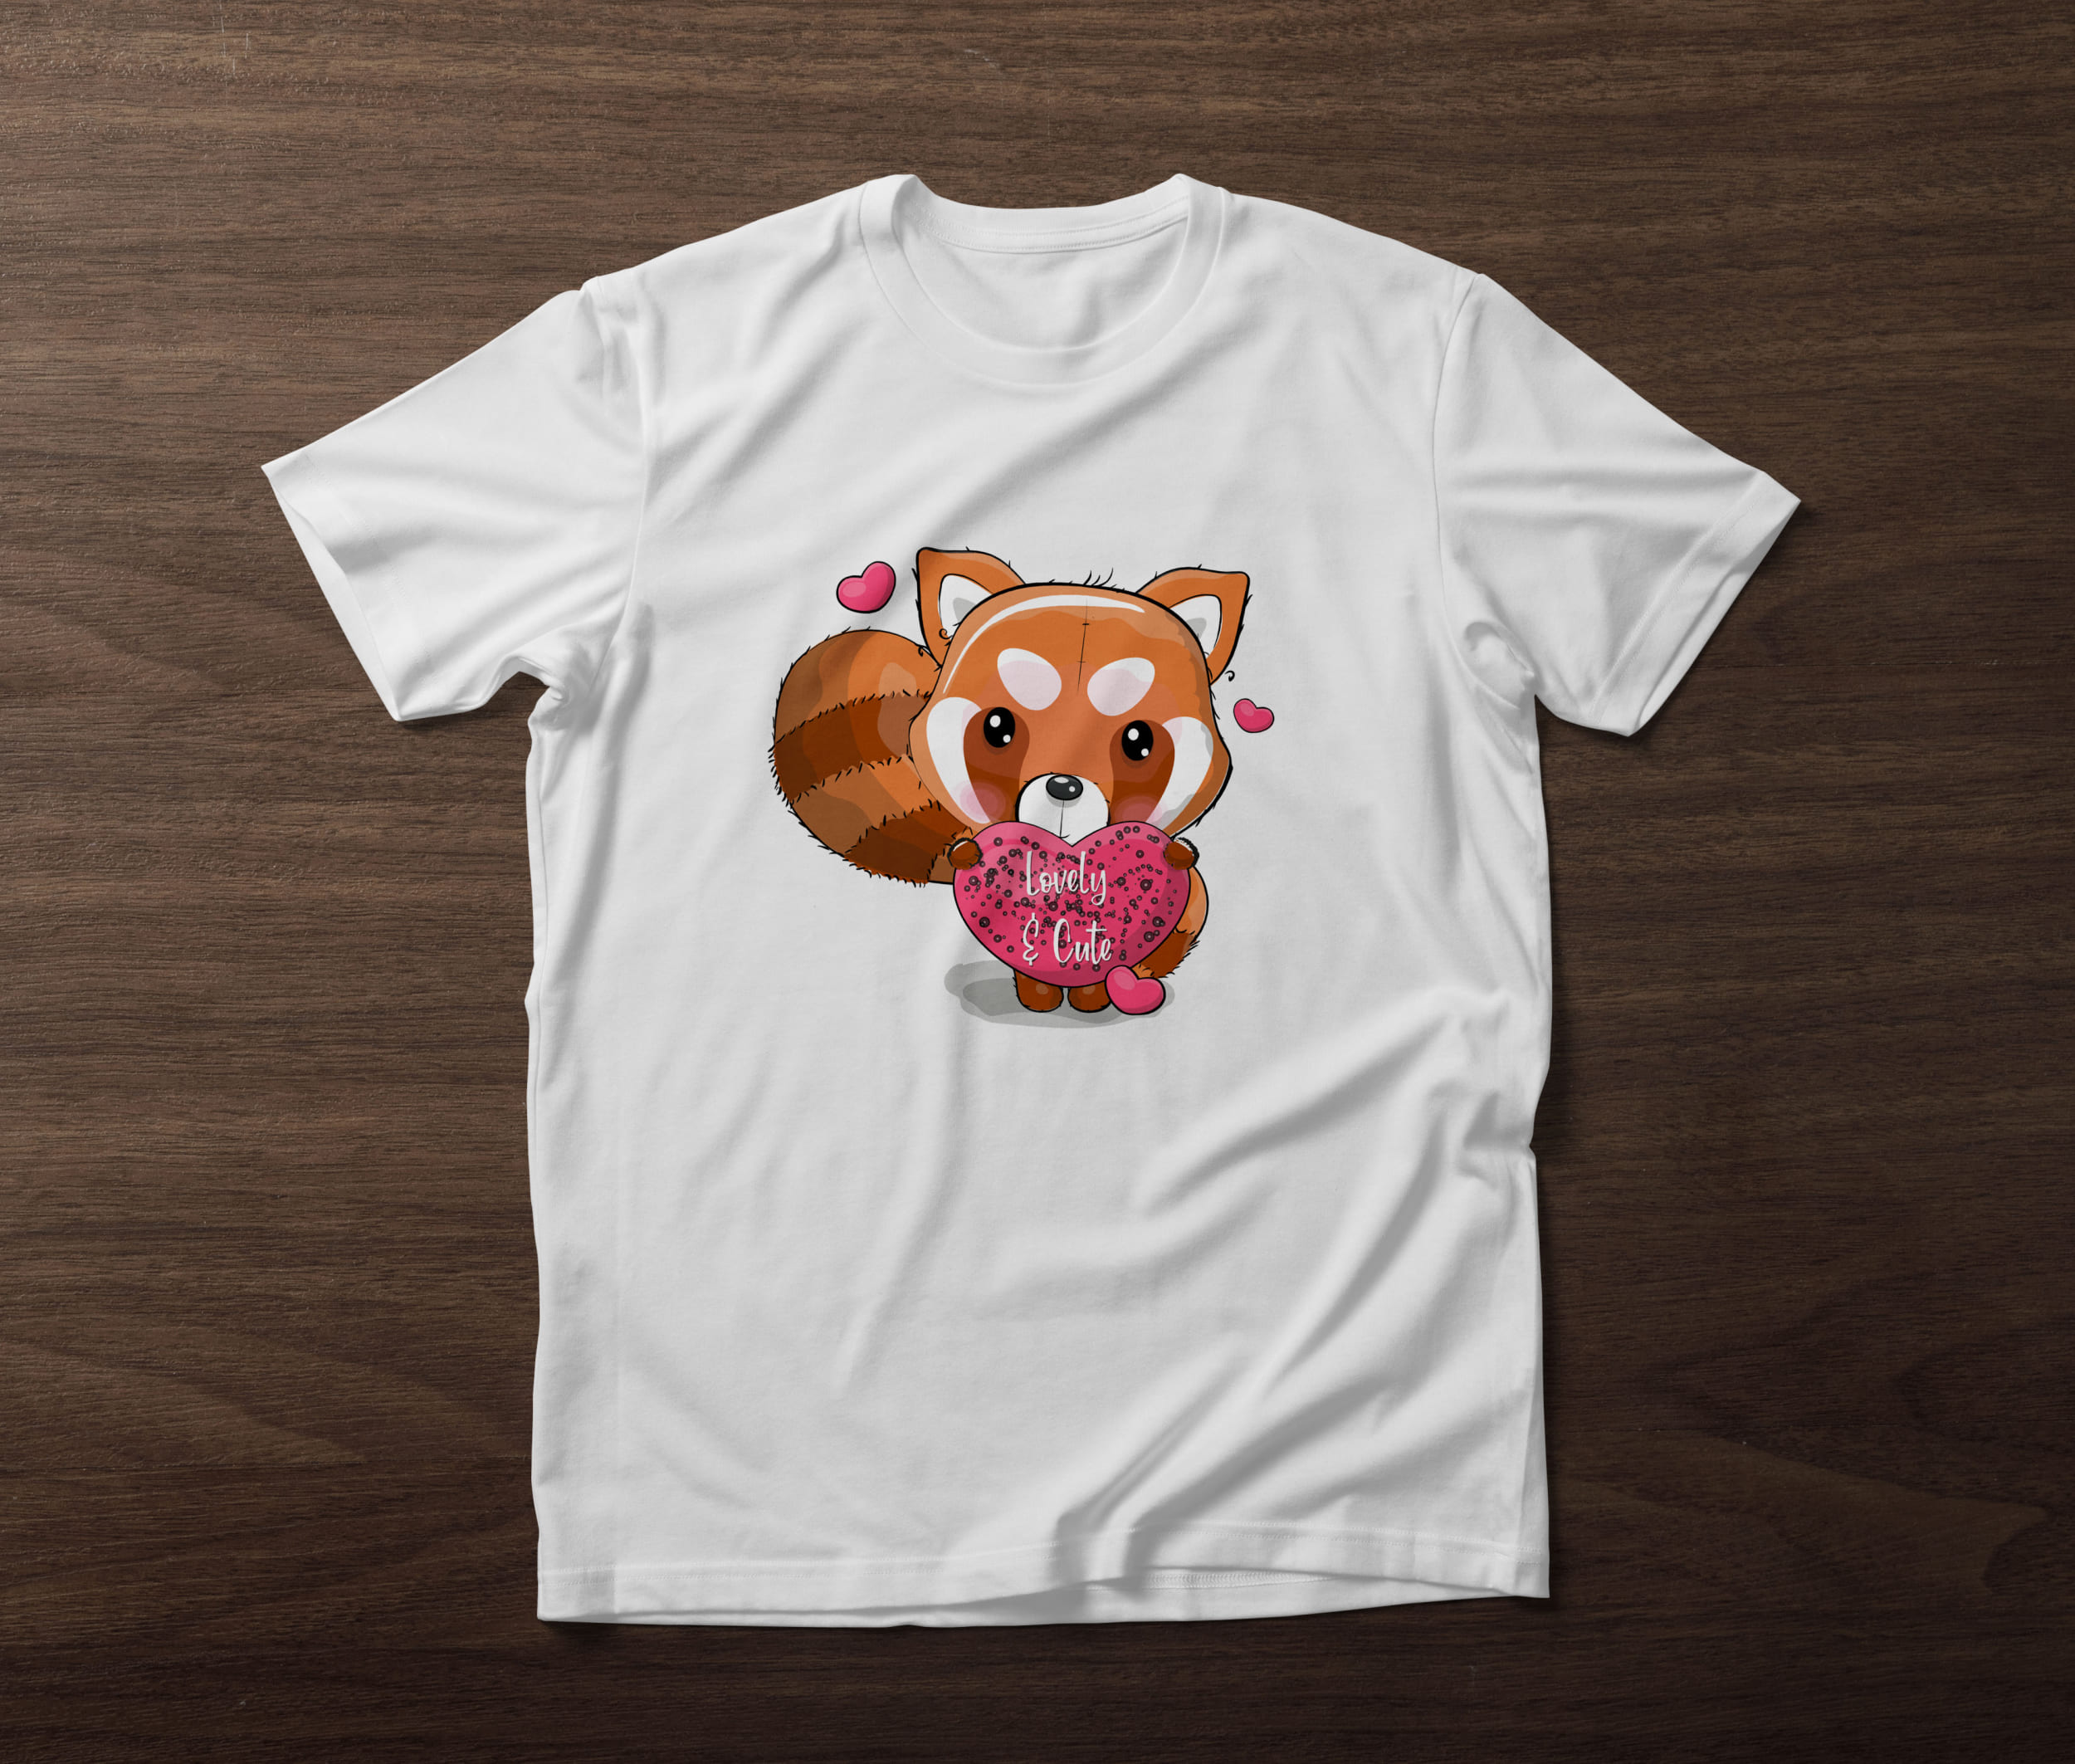 White t-shirt with a red panda and pink hearts on a wooden background.